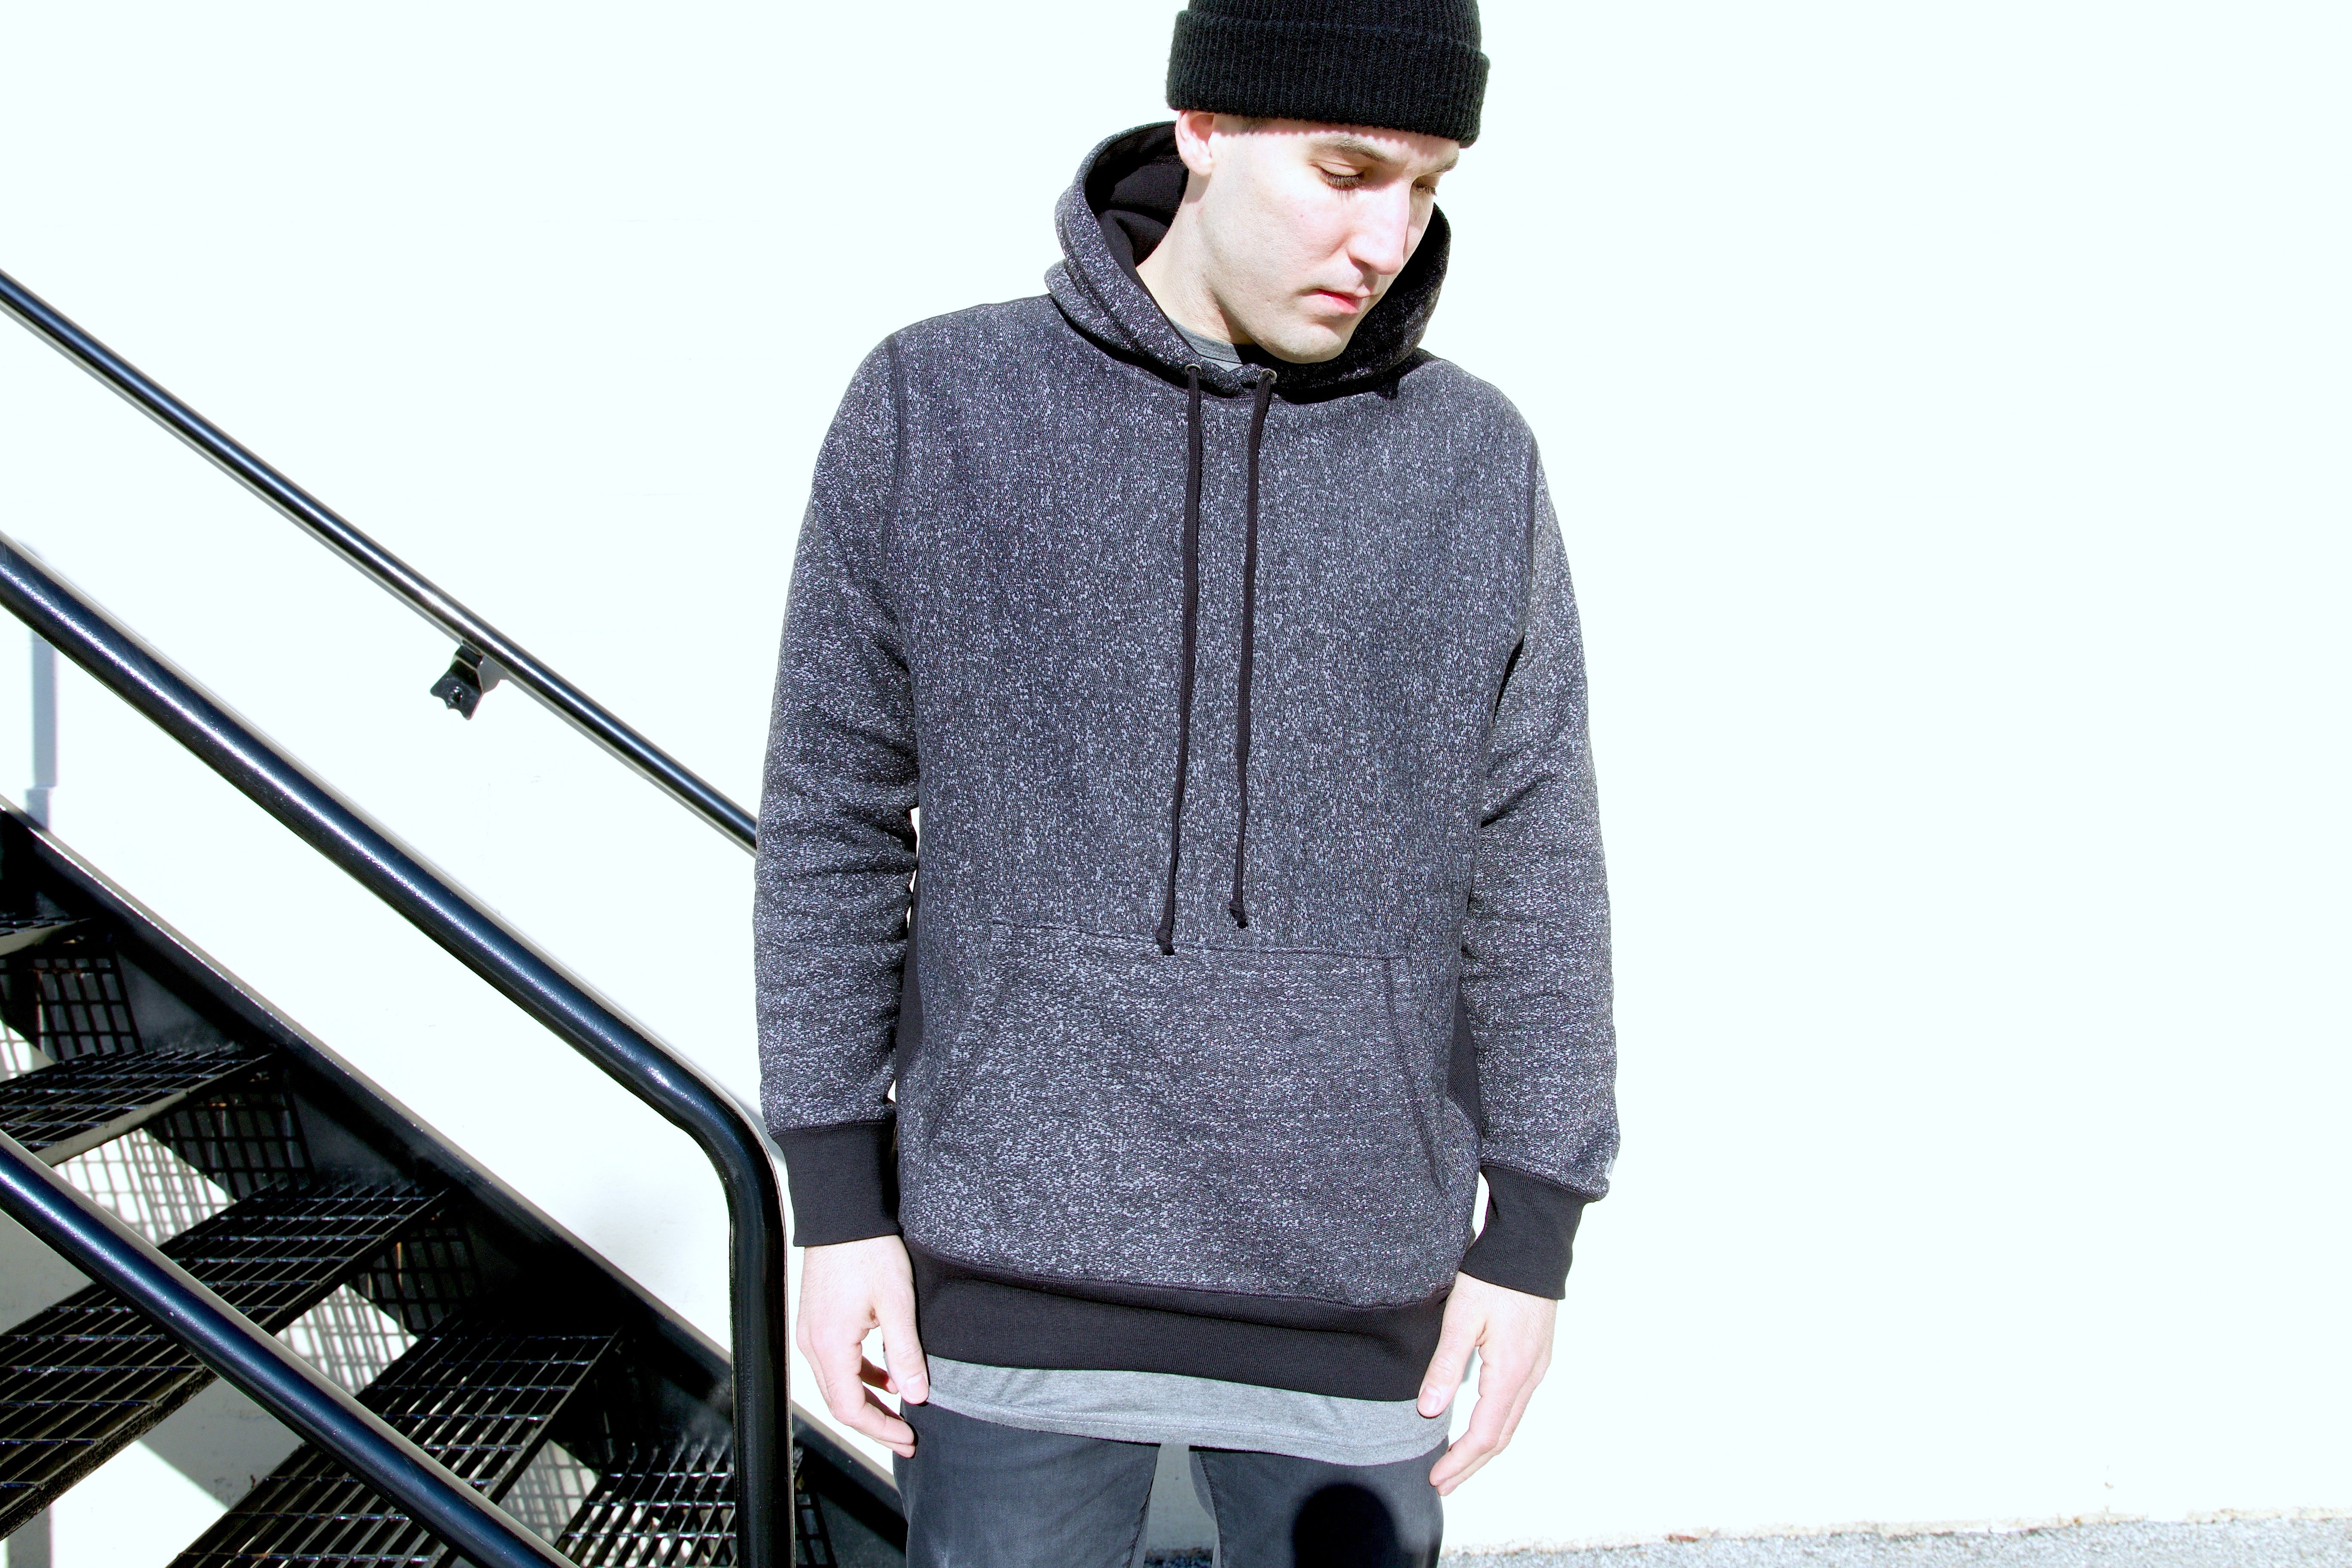 The "Lifetime" Hooded Sweatshirt in Speckled Charcoal